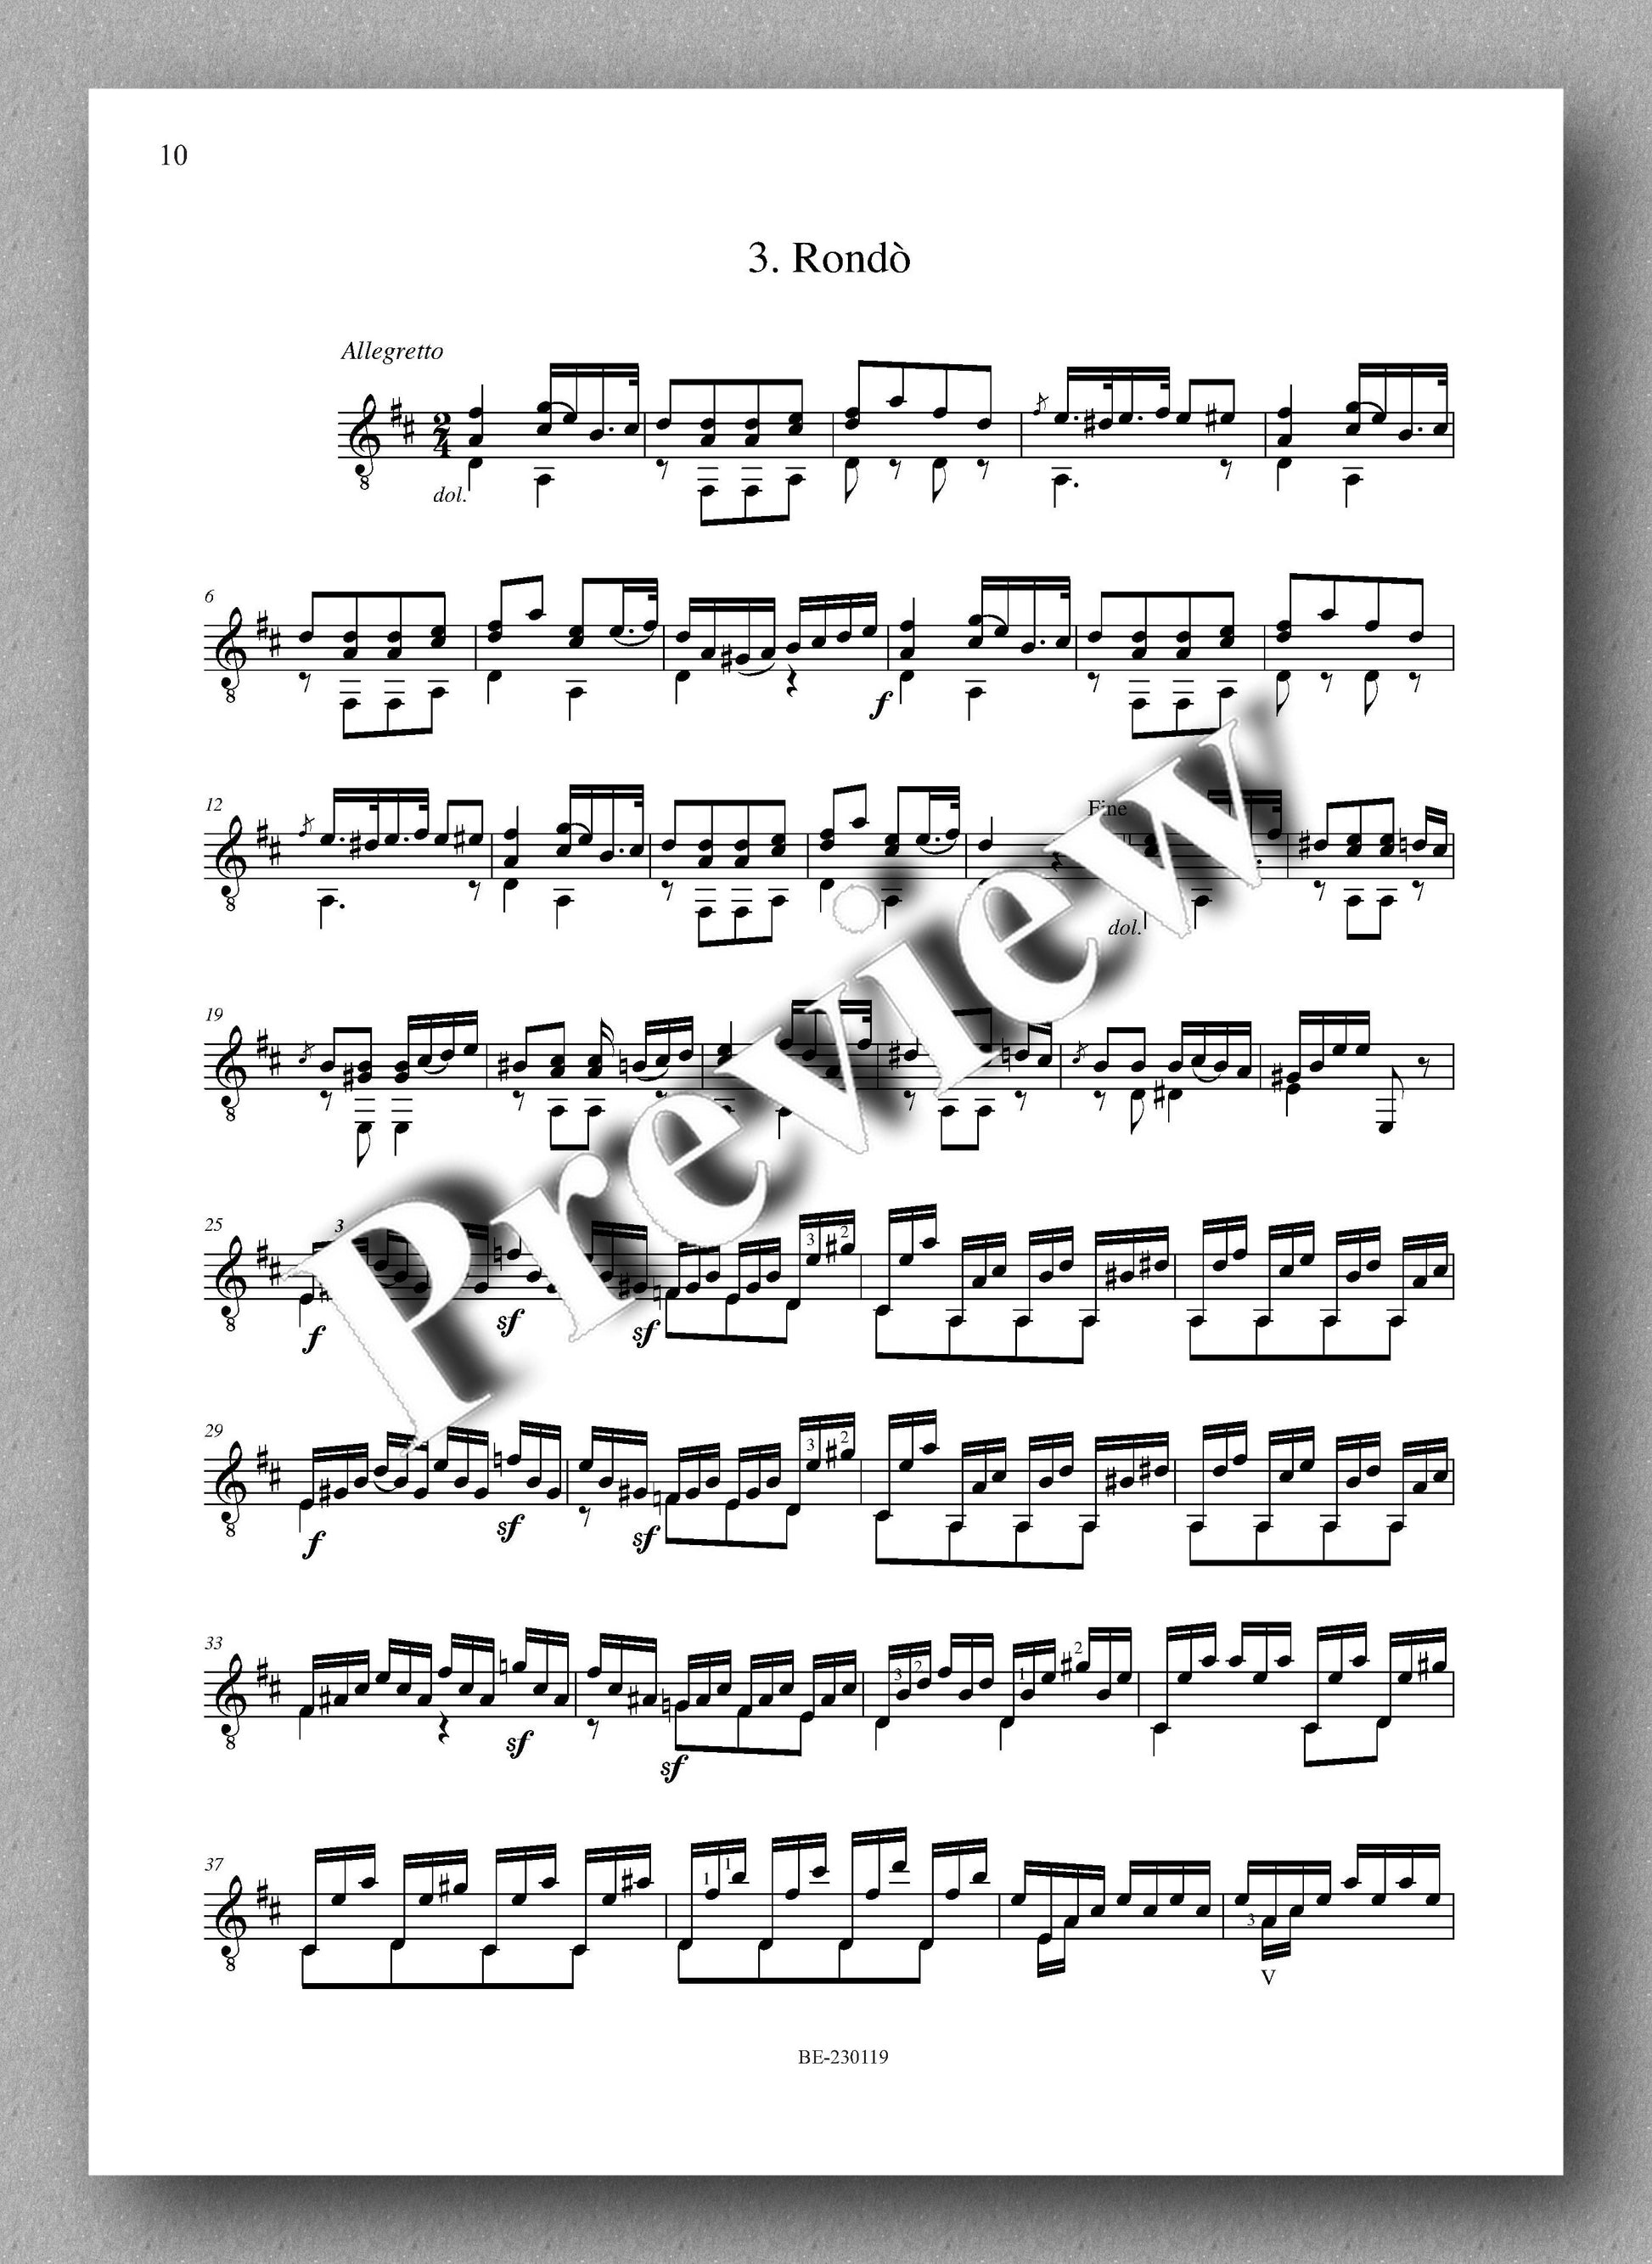 Molino, Collected Works for Guitar Solo, Vol. 31 - preview of the music score 3